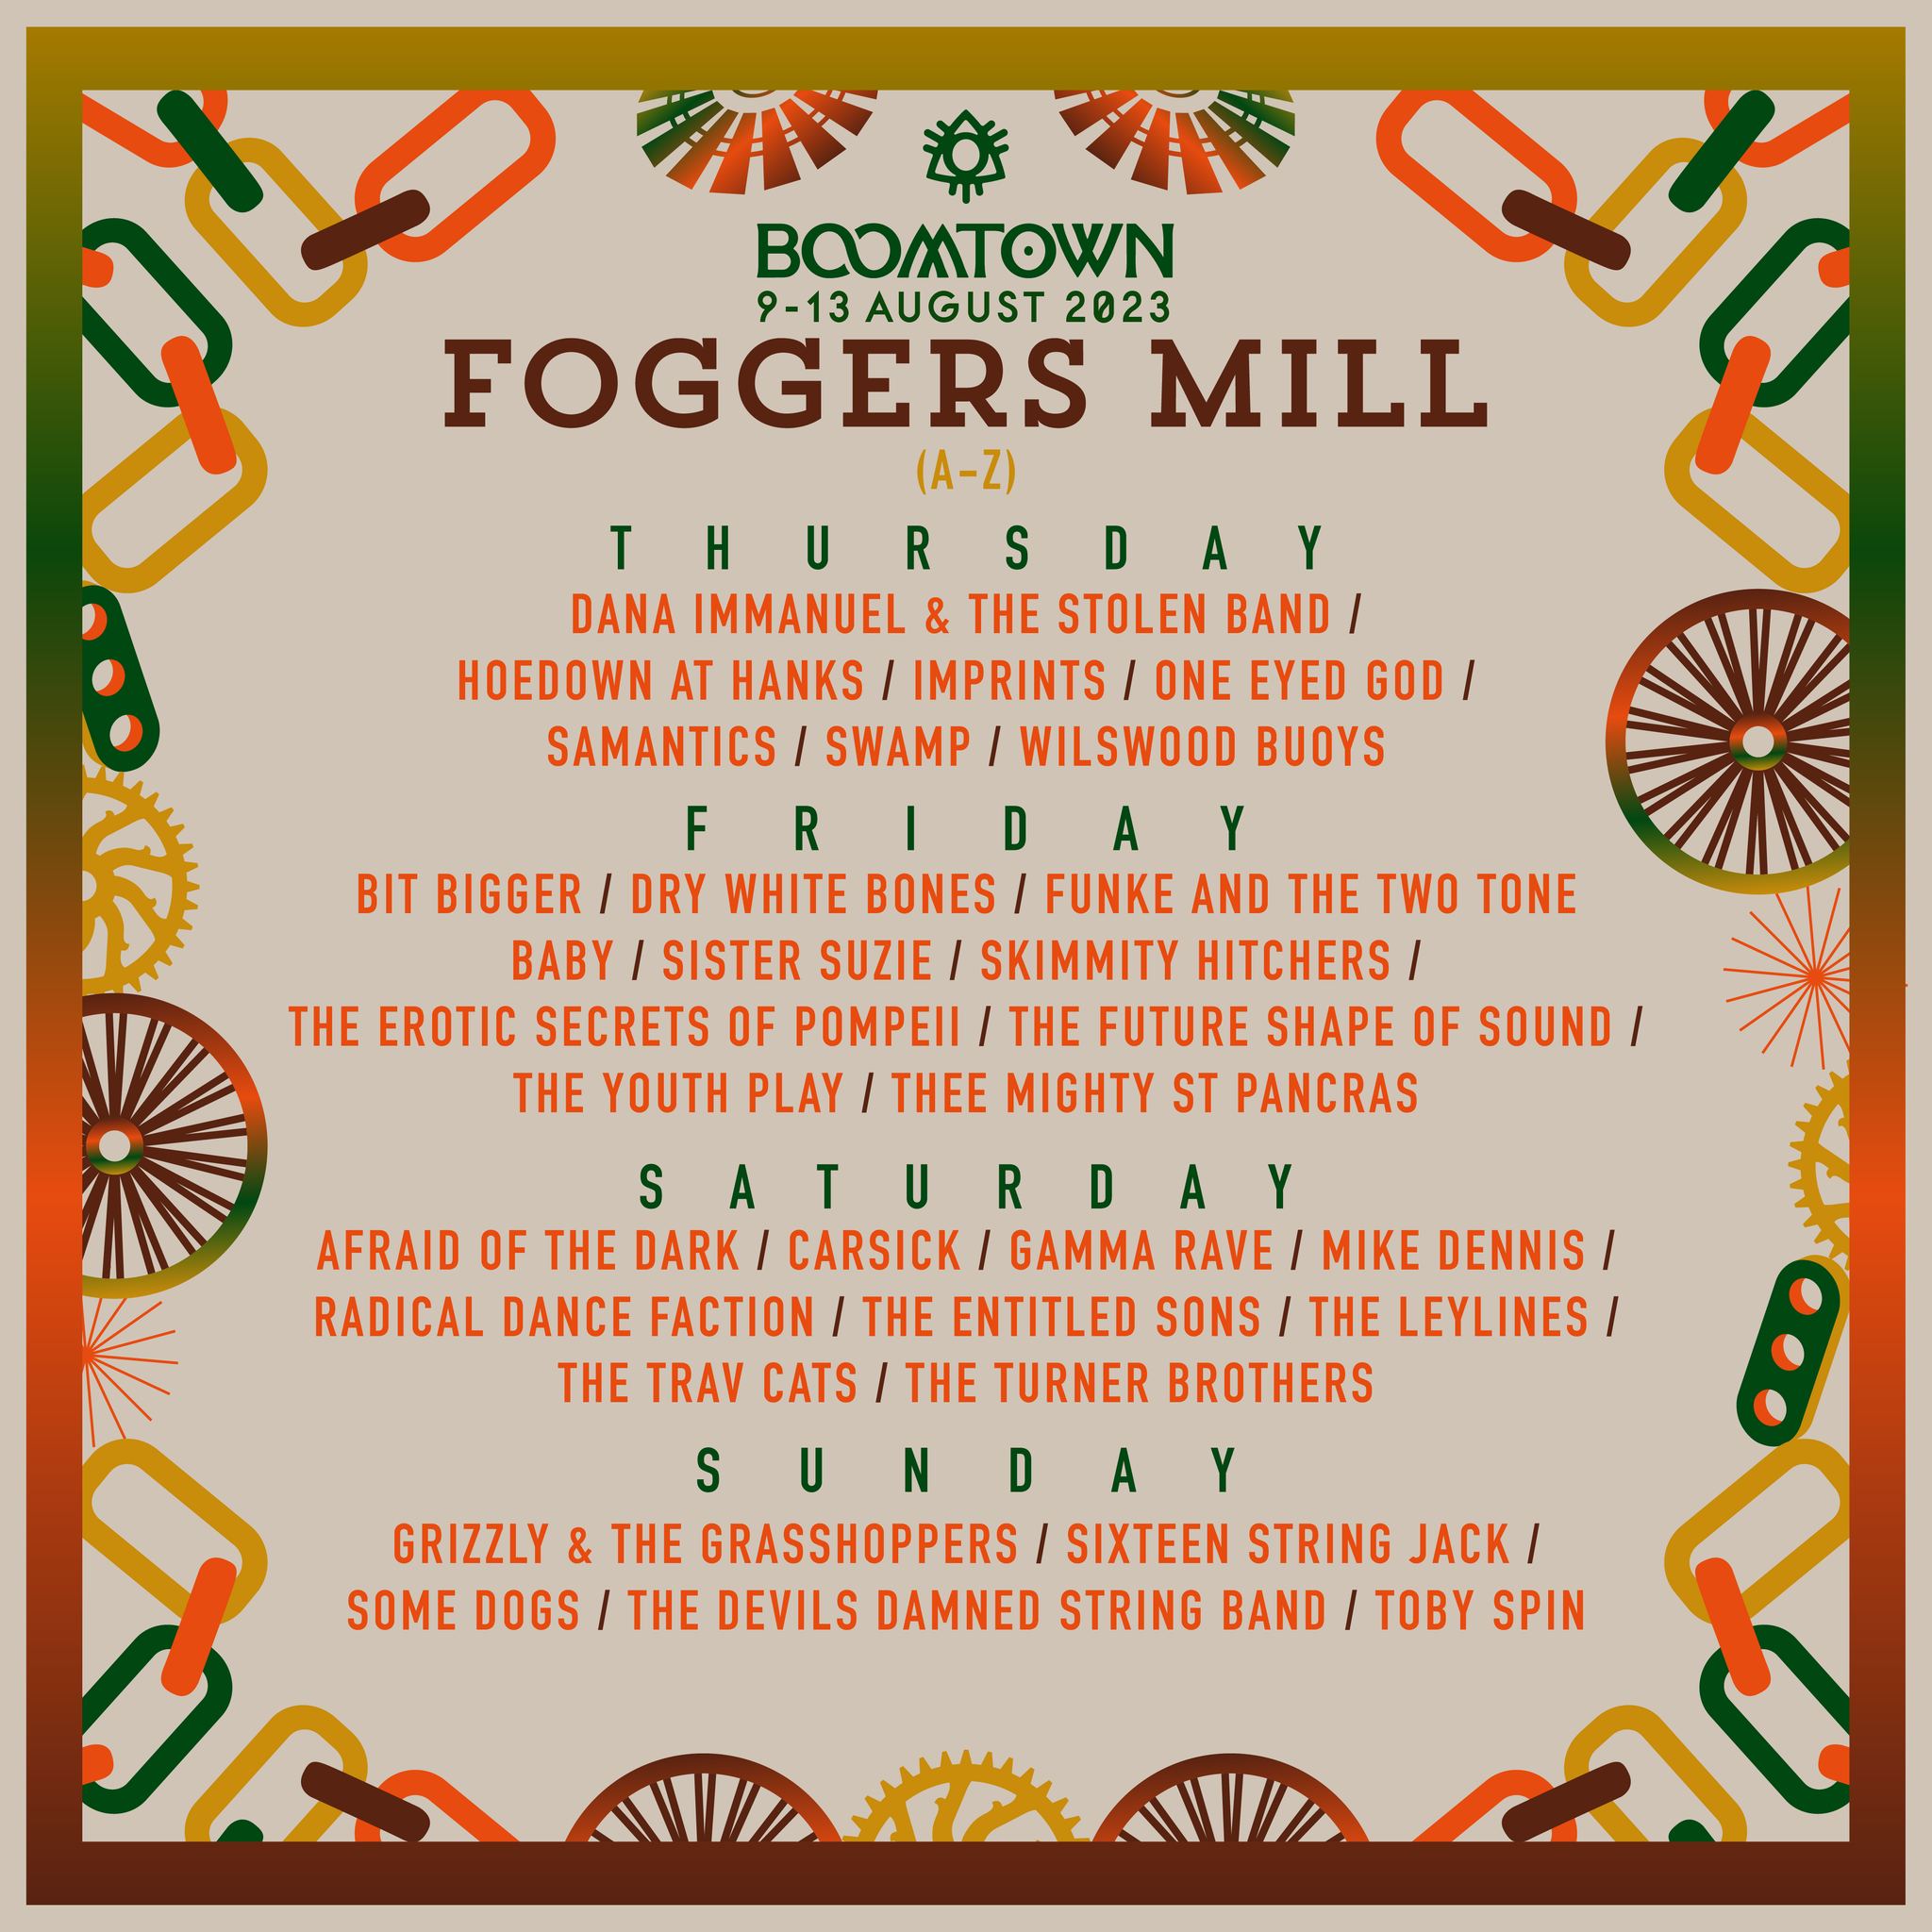 Boomtown Foggers Mill Lineup 2023